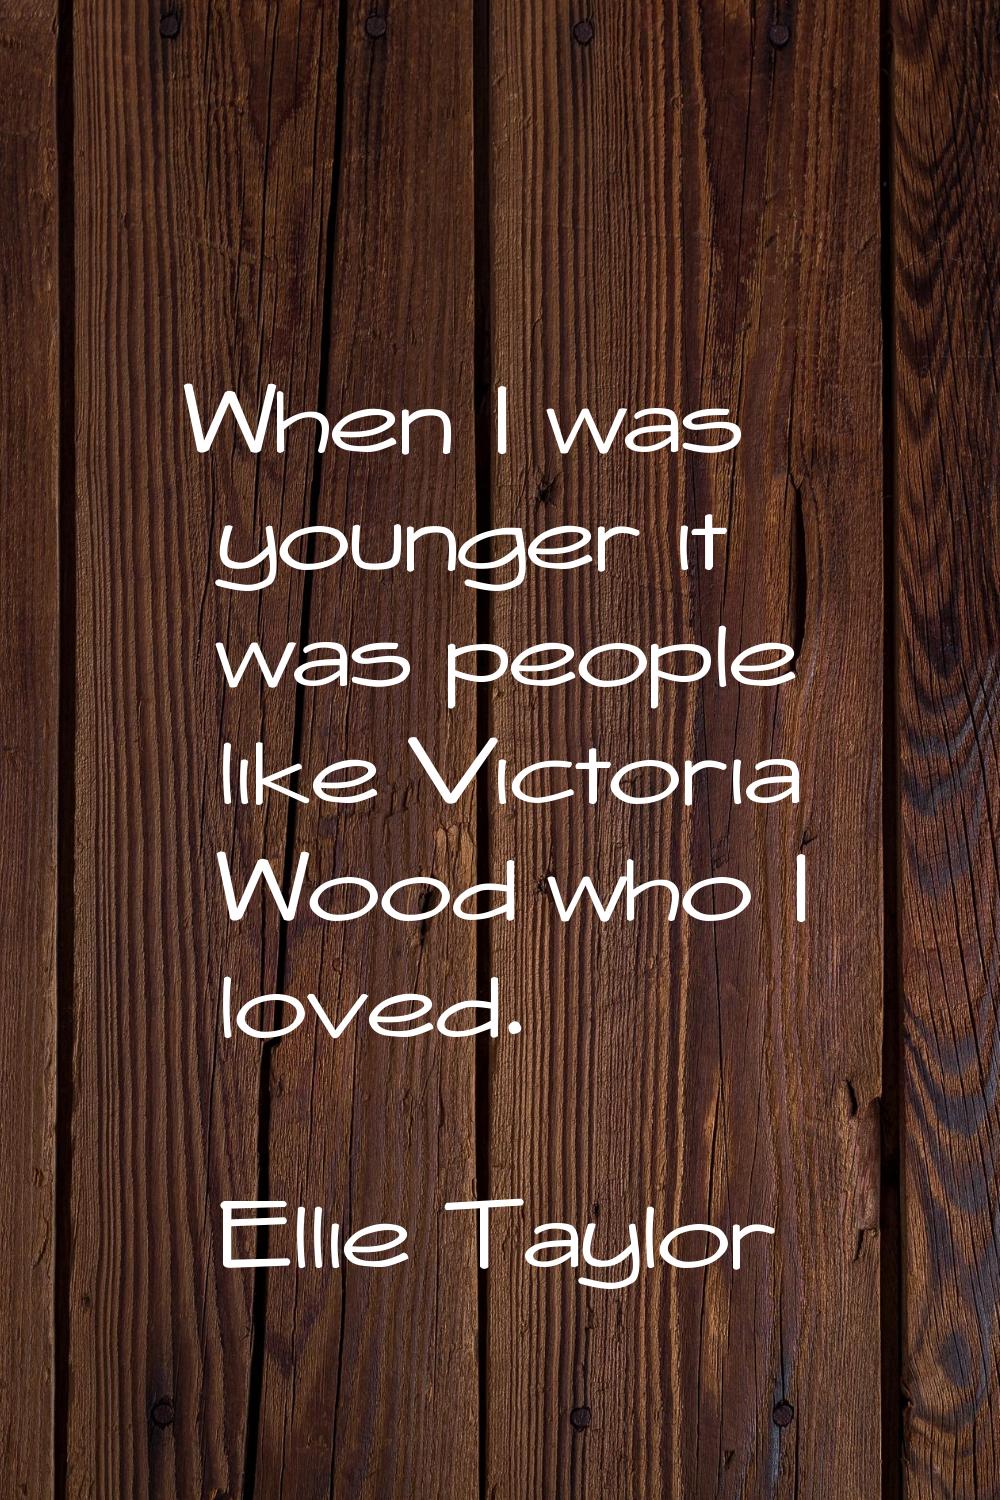 When I was younger it was people like Victoria Wood who I loved.